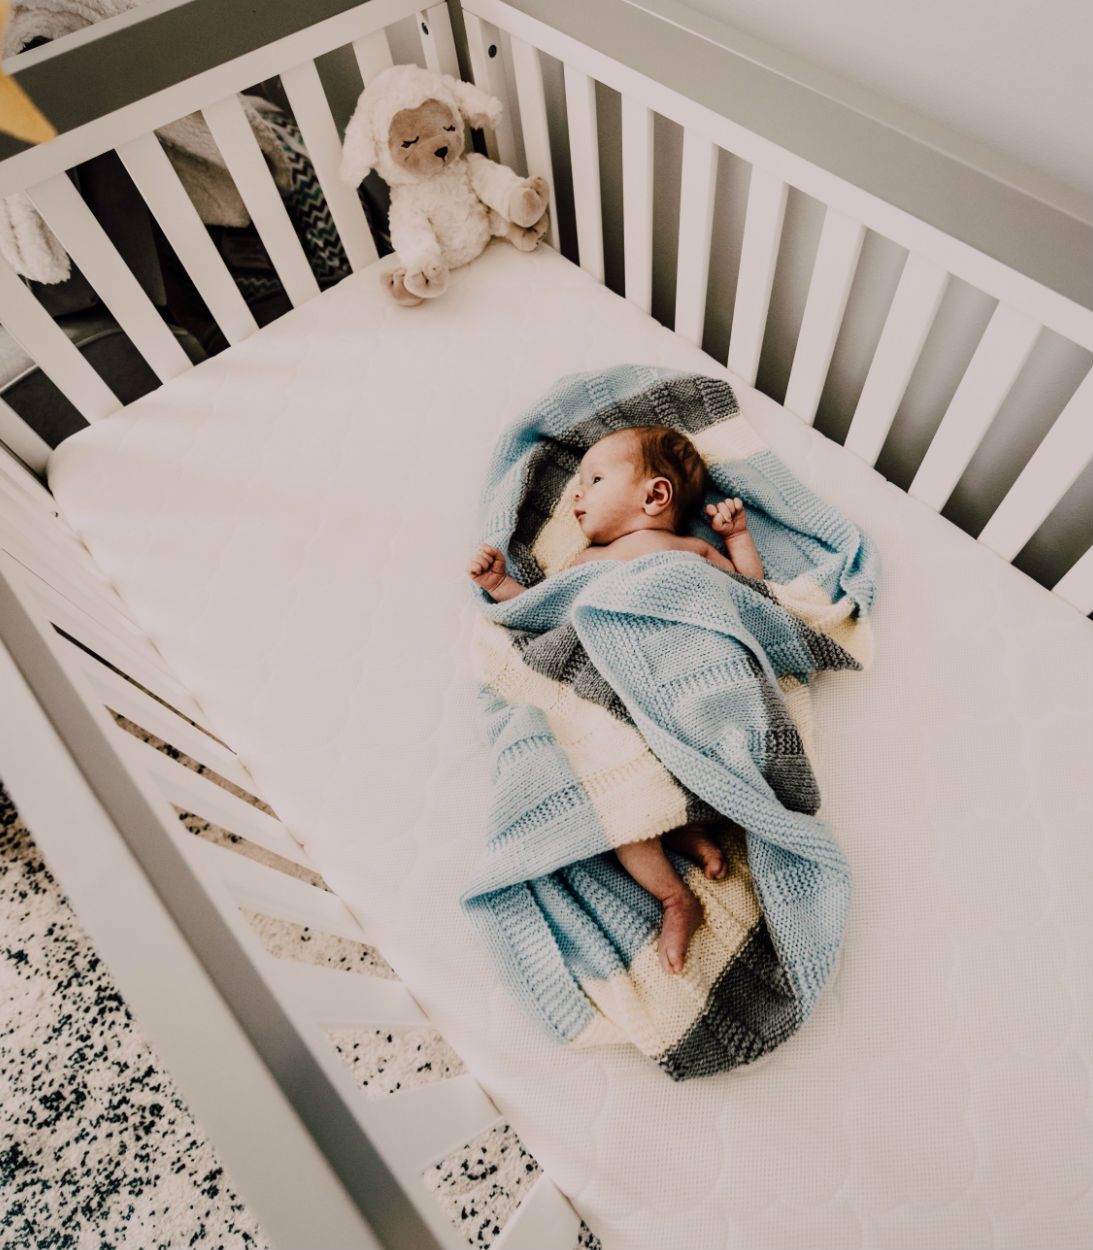 Infant sleeping in a cot